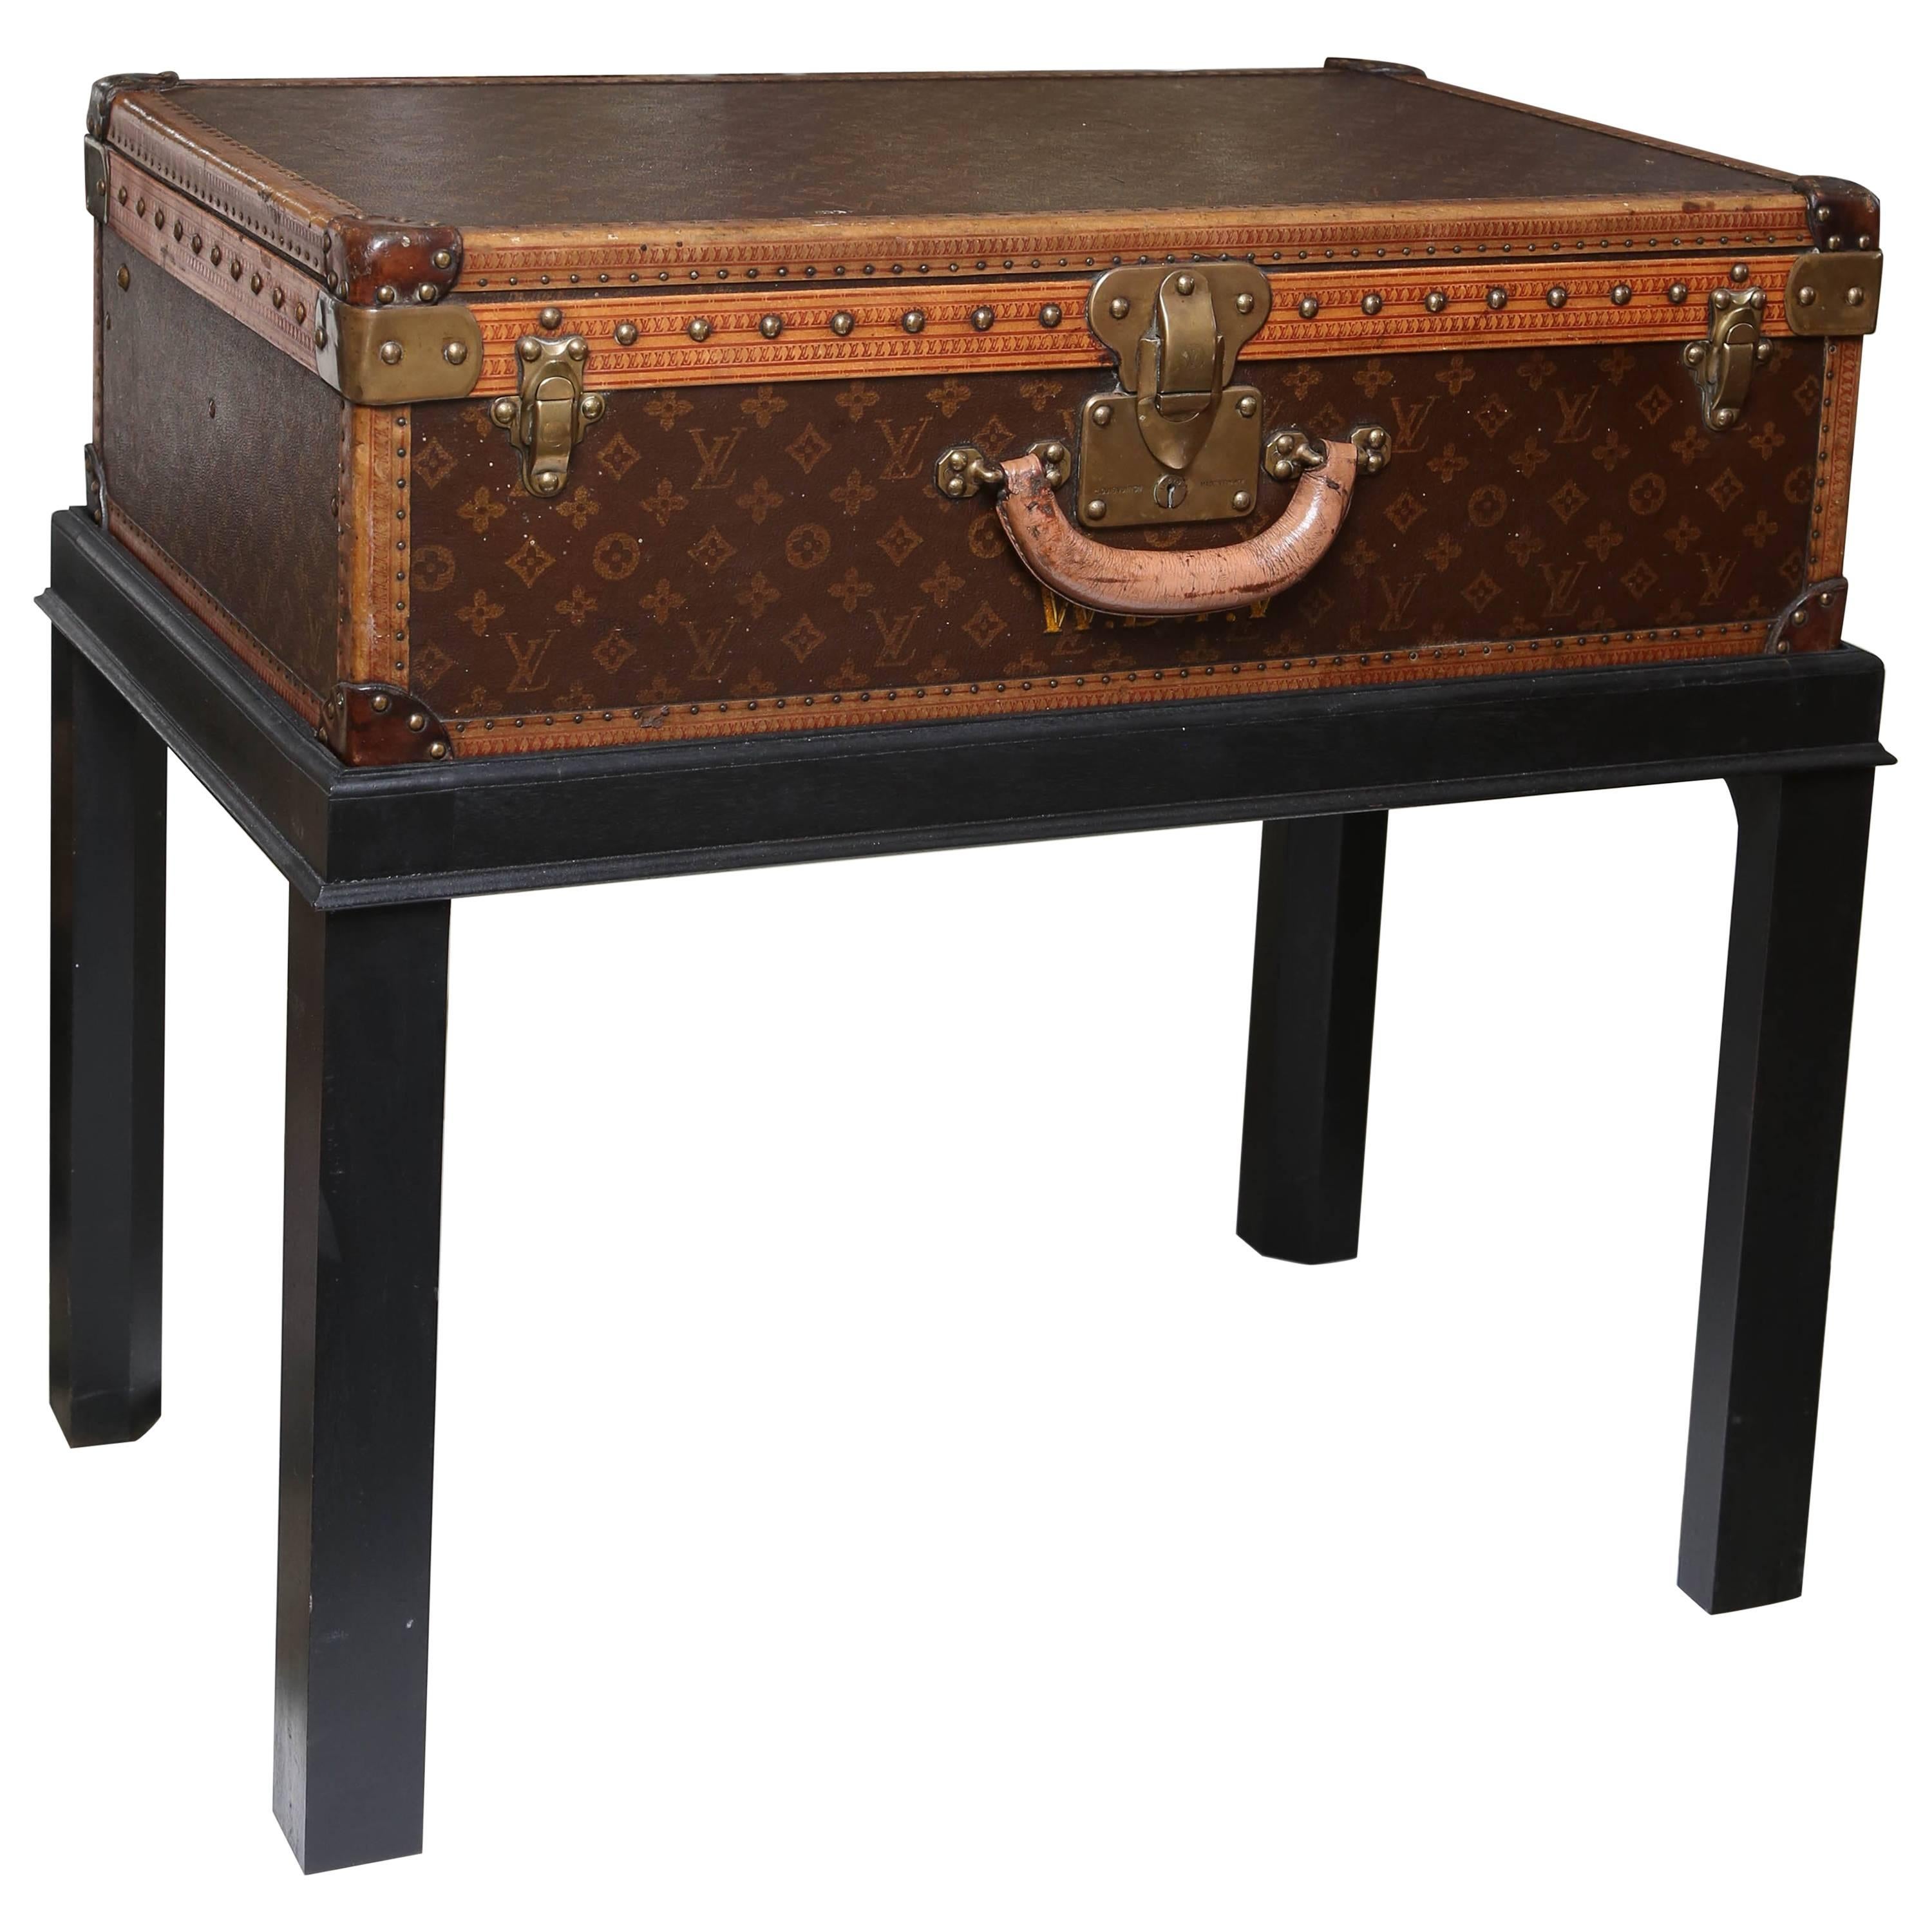 Vintage Louis Vuitton Hard Cover Suitcase Mounted as a Table